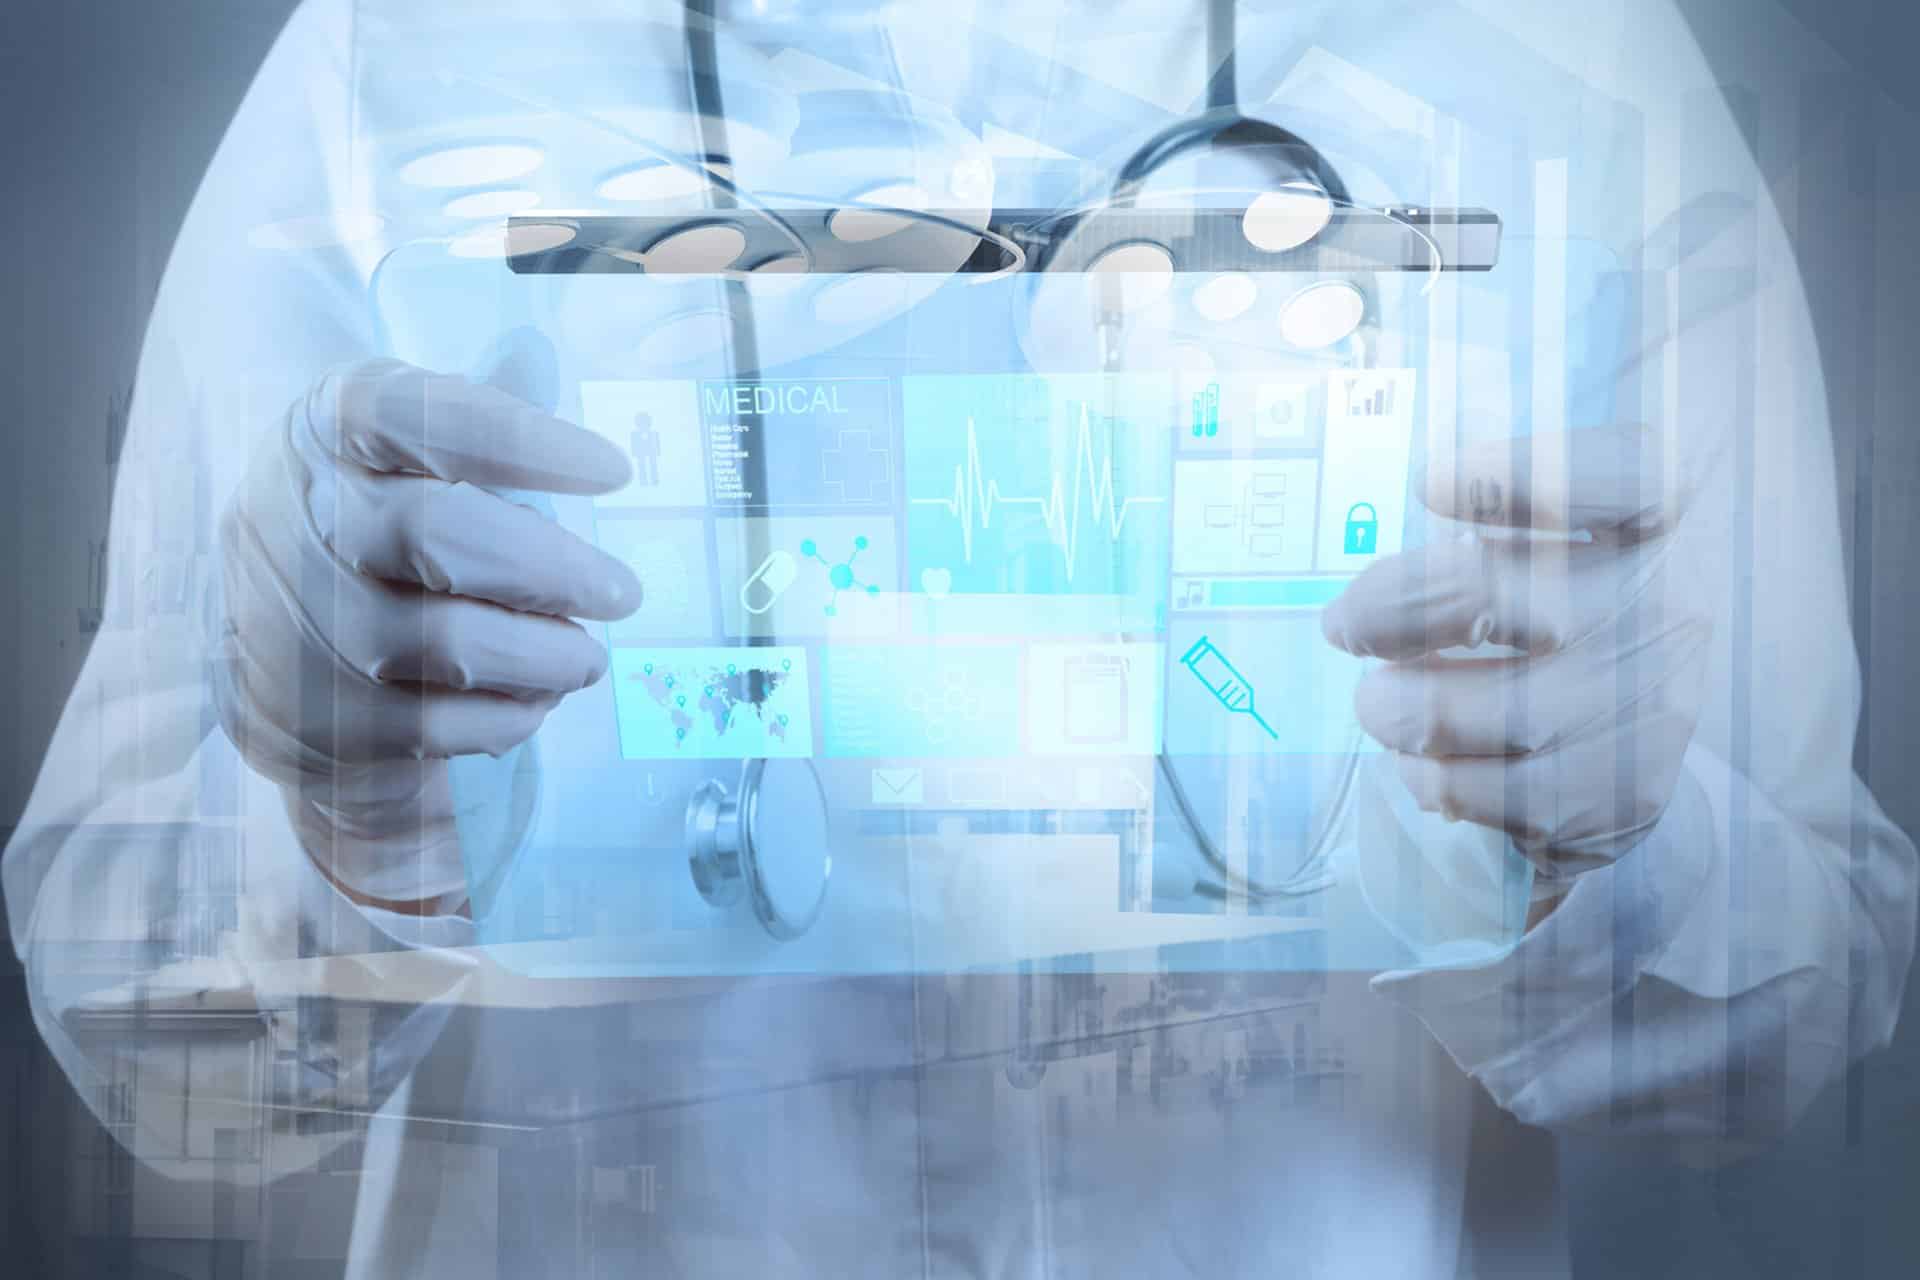 do long island physicians need managed services to be essential